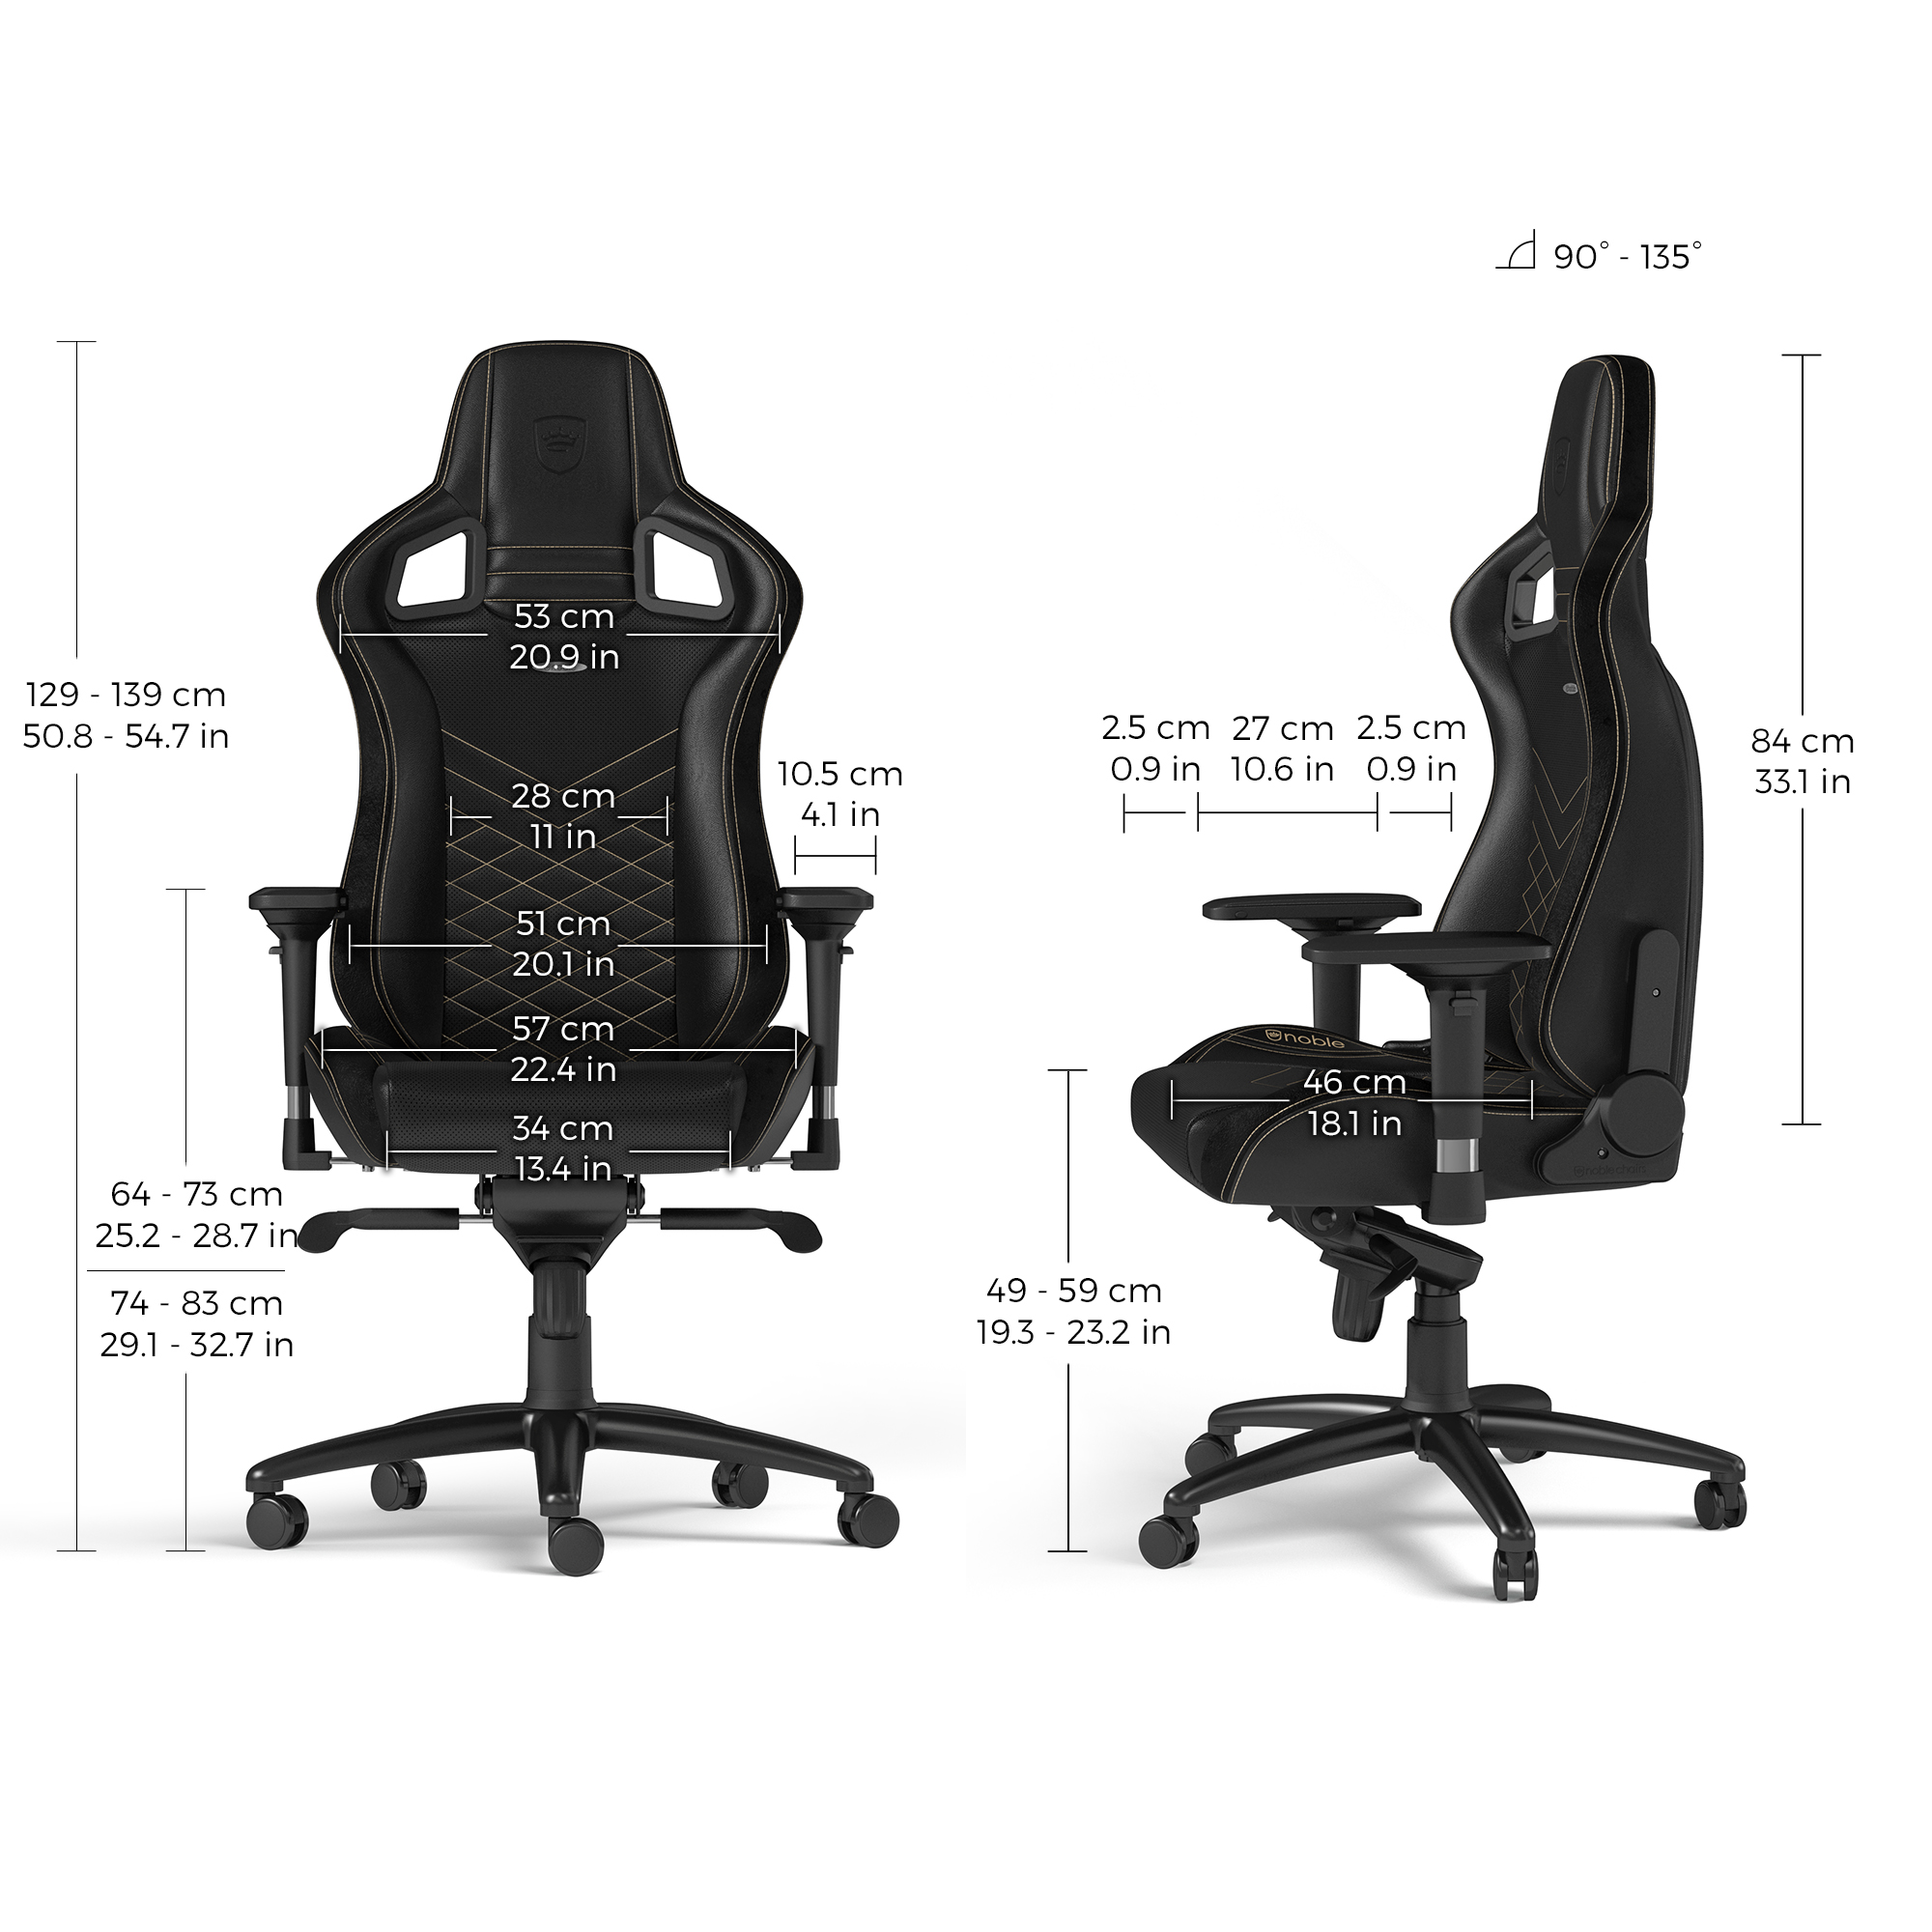 noblechairs - noblechairs EPIC Gaming Chair - Black/Gold